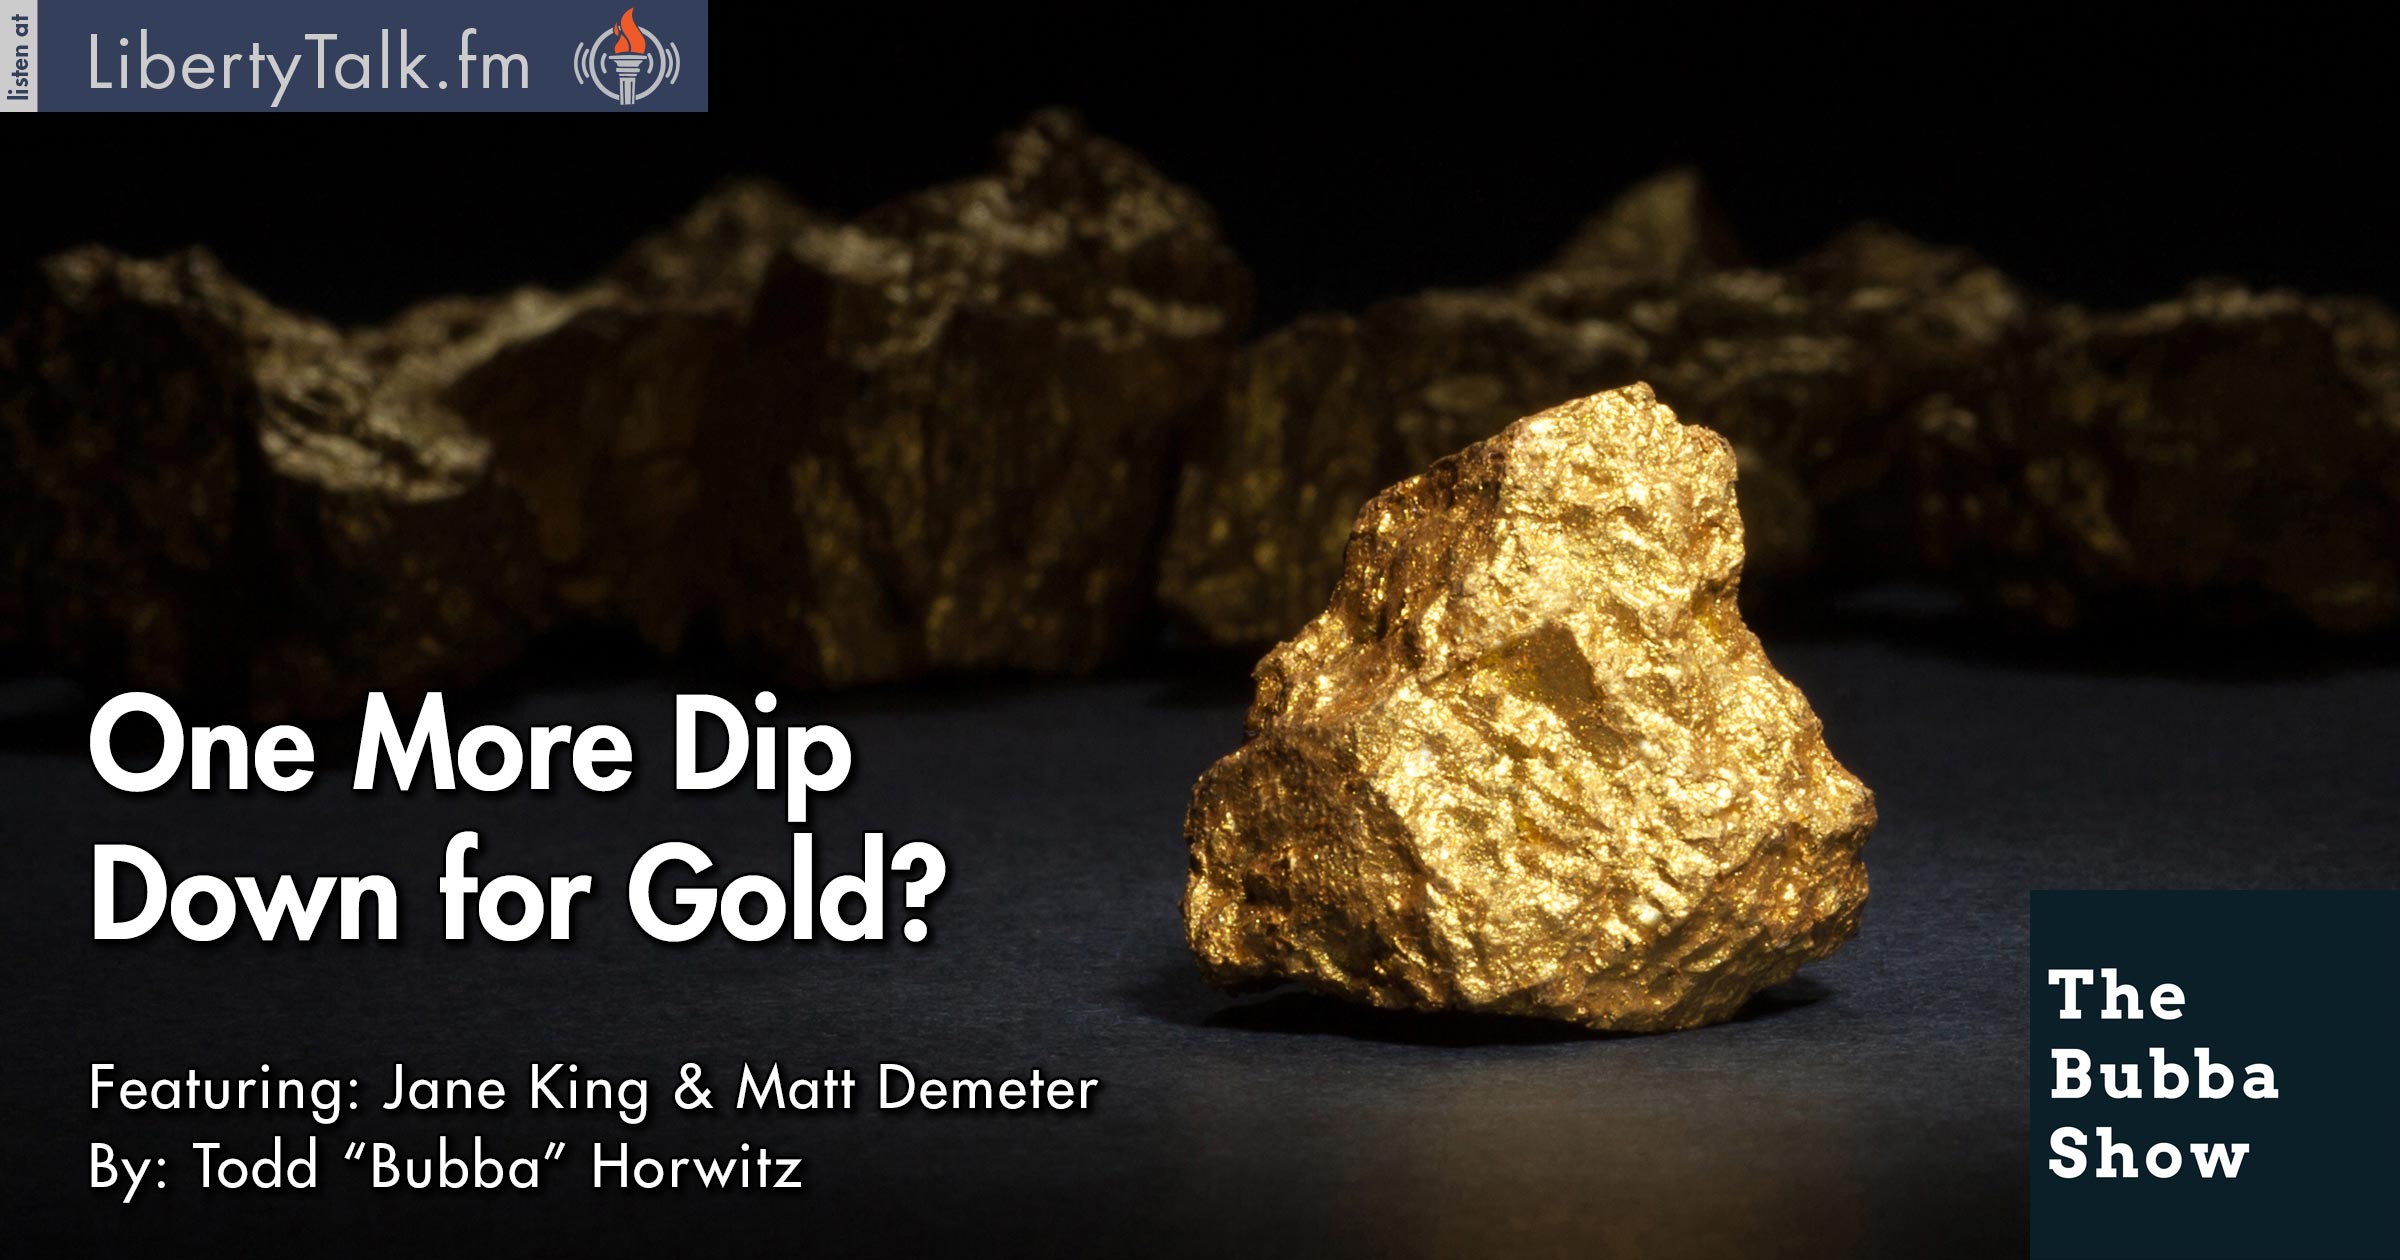 One More Dip Down for Gold? - The Bubba Show